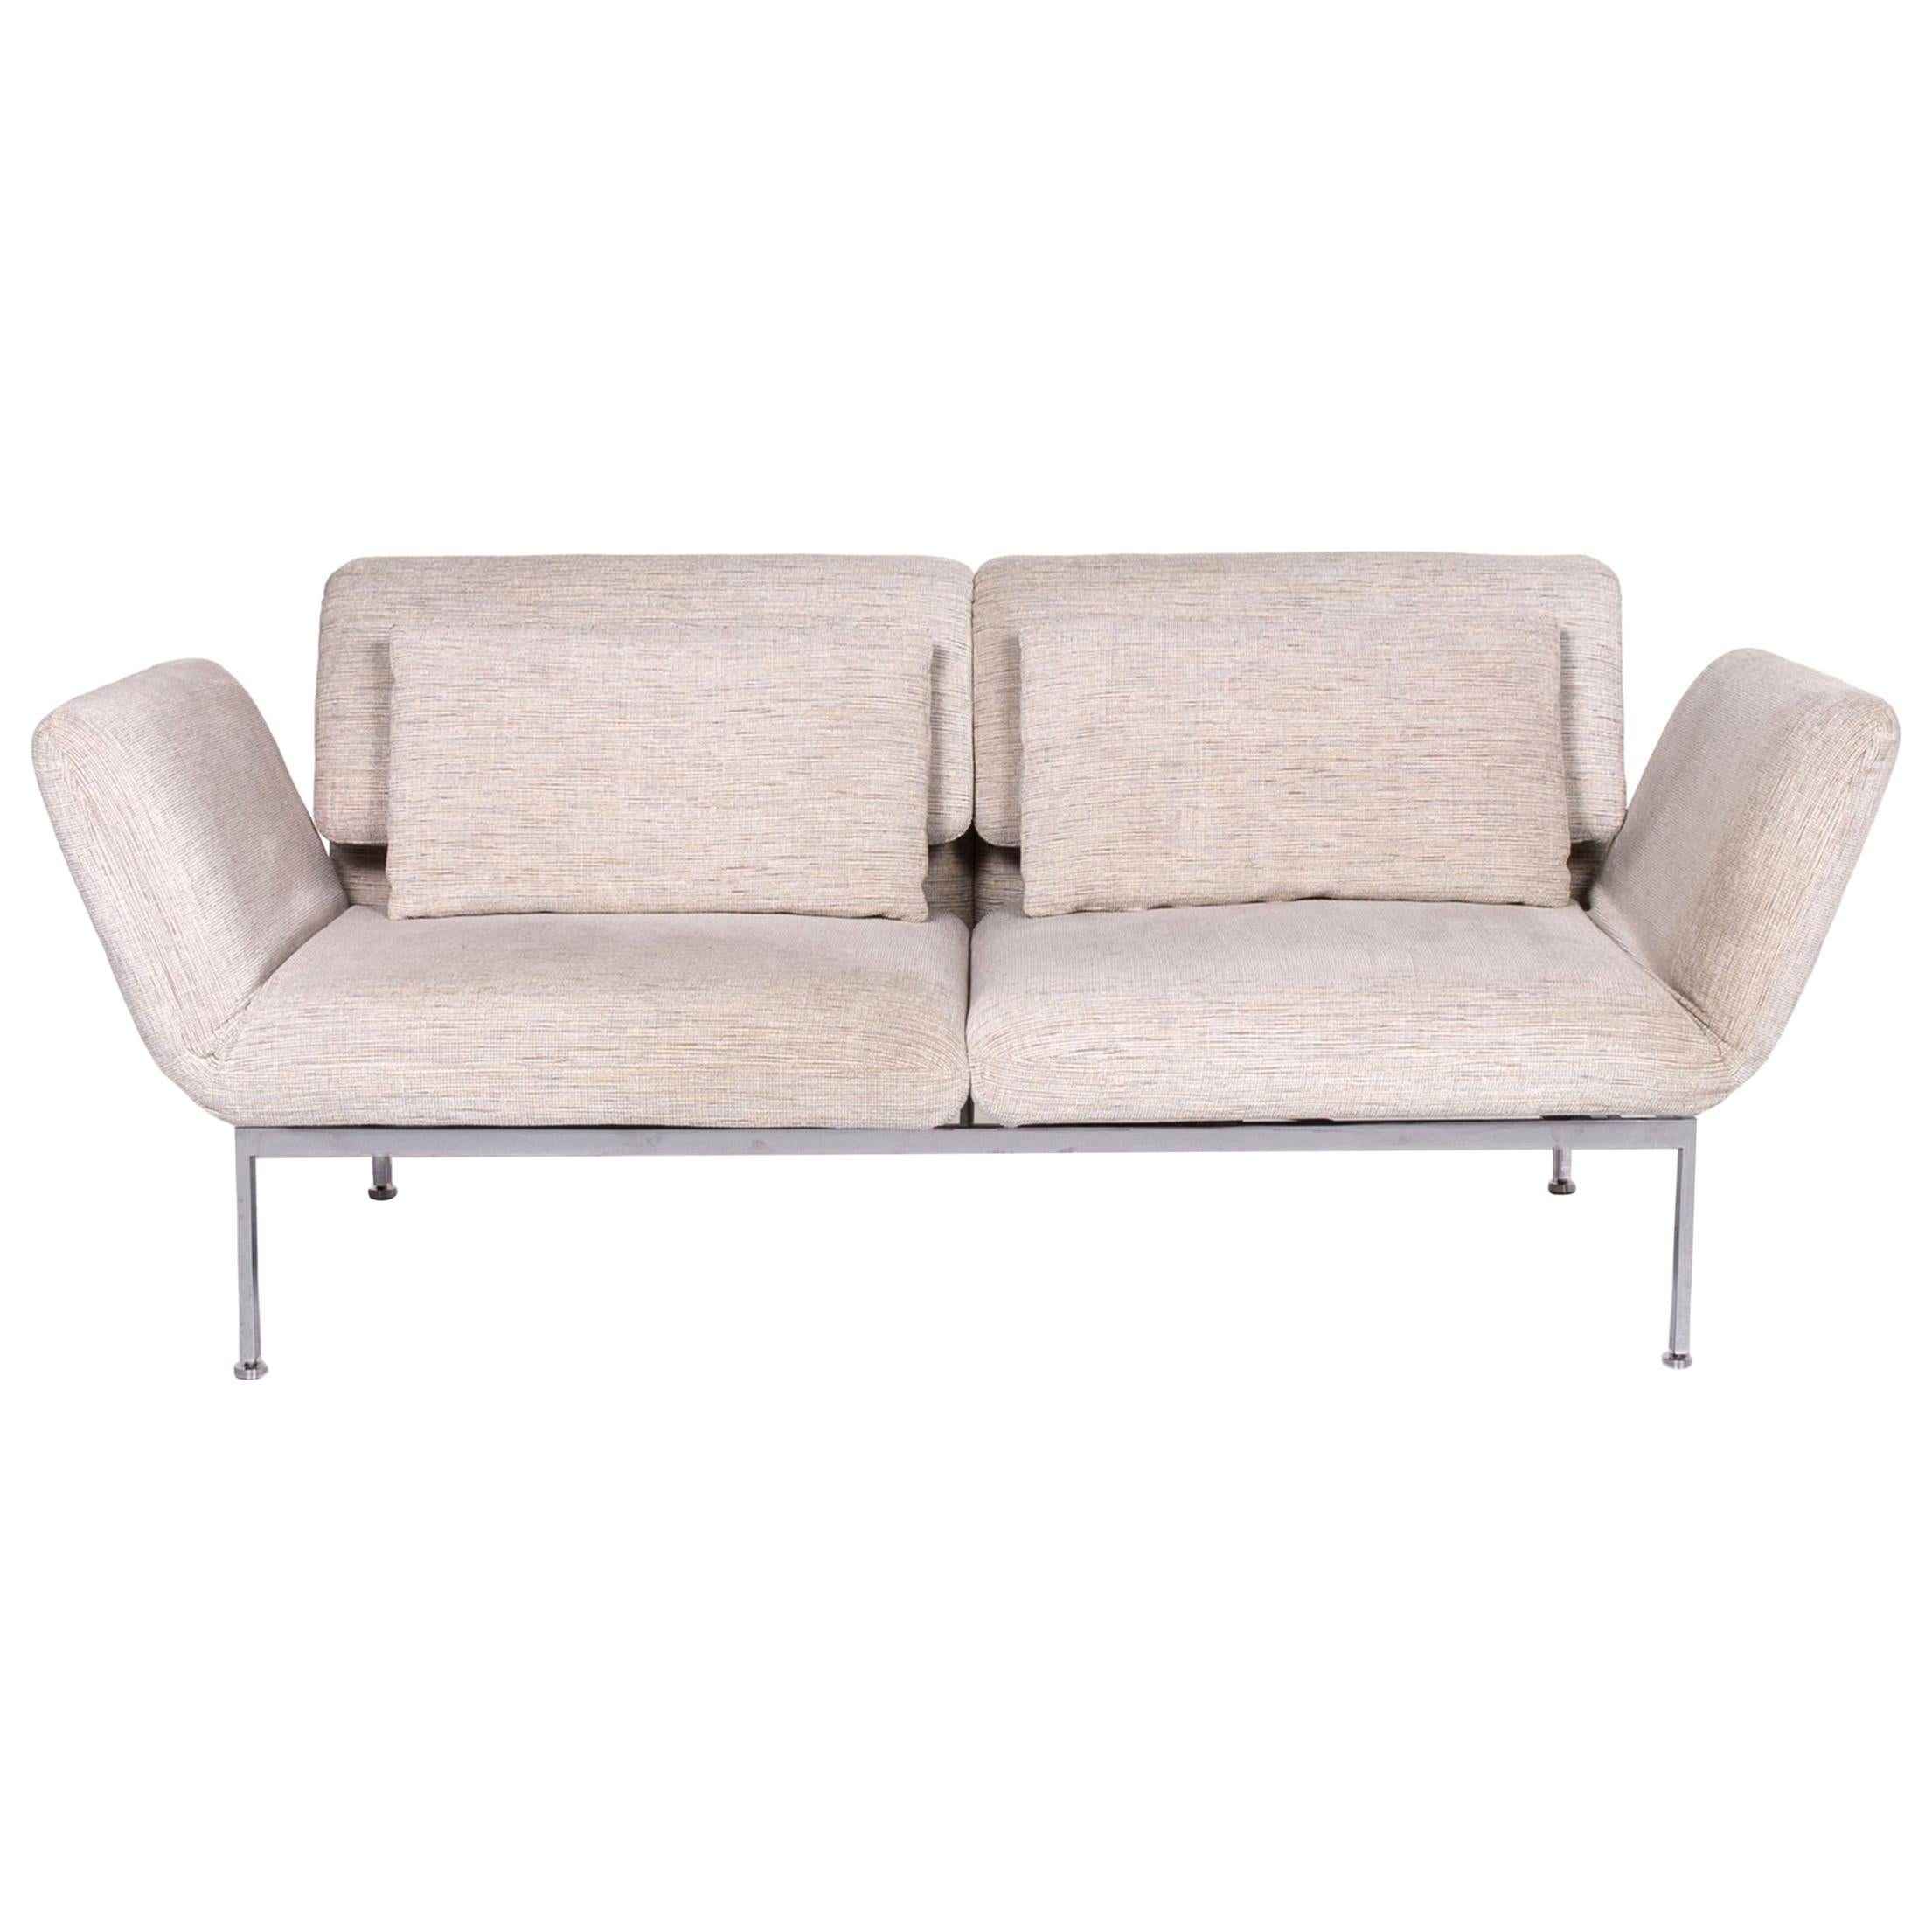 Brühl & Sippold Roro Leather Sofa Cream Sofa Bed Sleep Function Relax For Sale